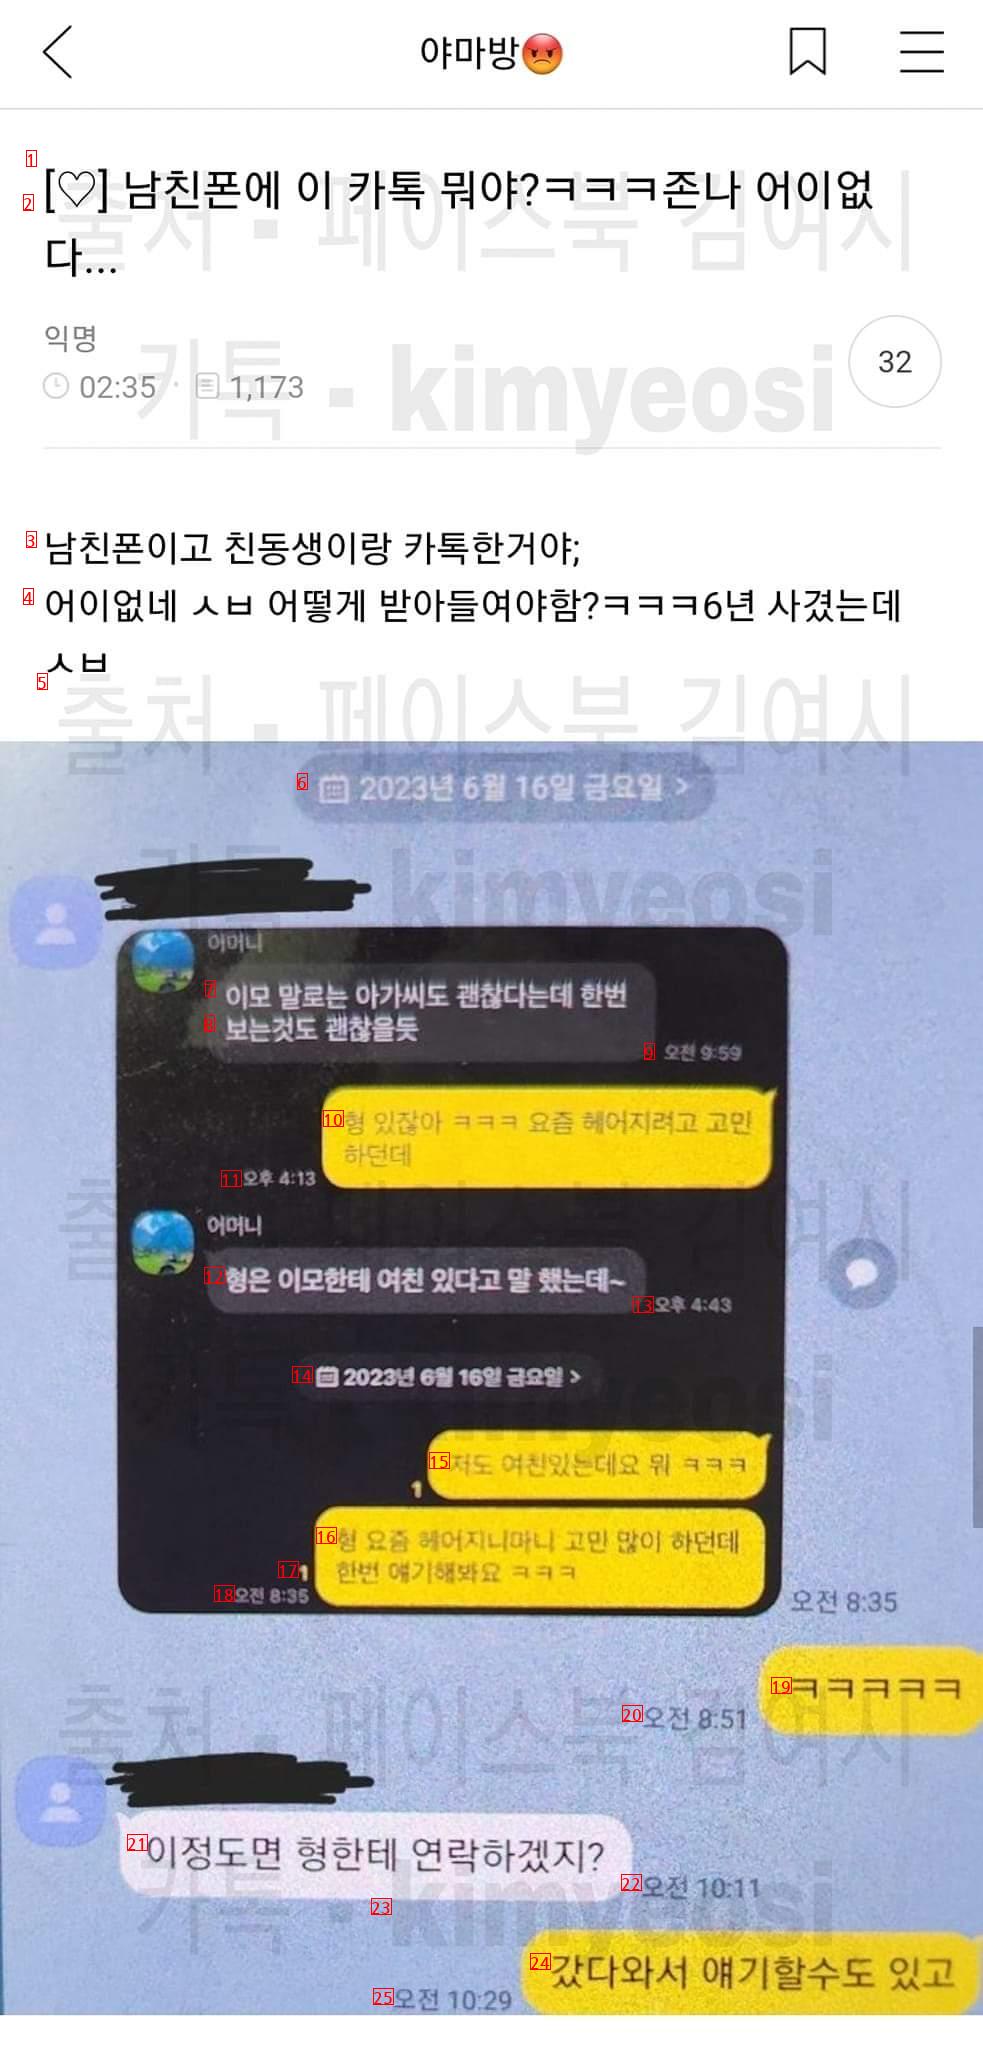 A member of the Women's Generation who saw a message that a boyfriend of 6 years had with his younger brother. LOL